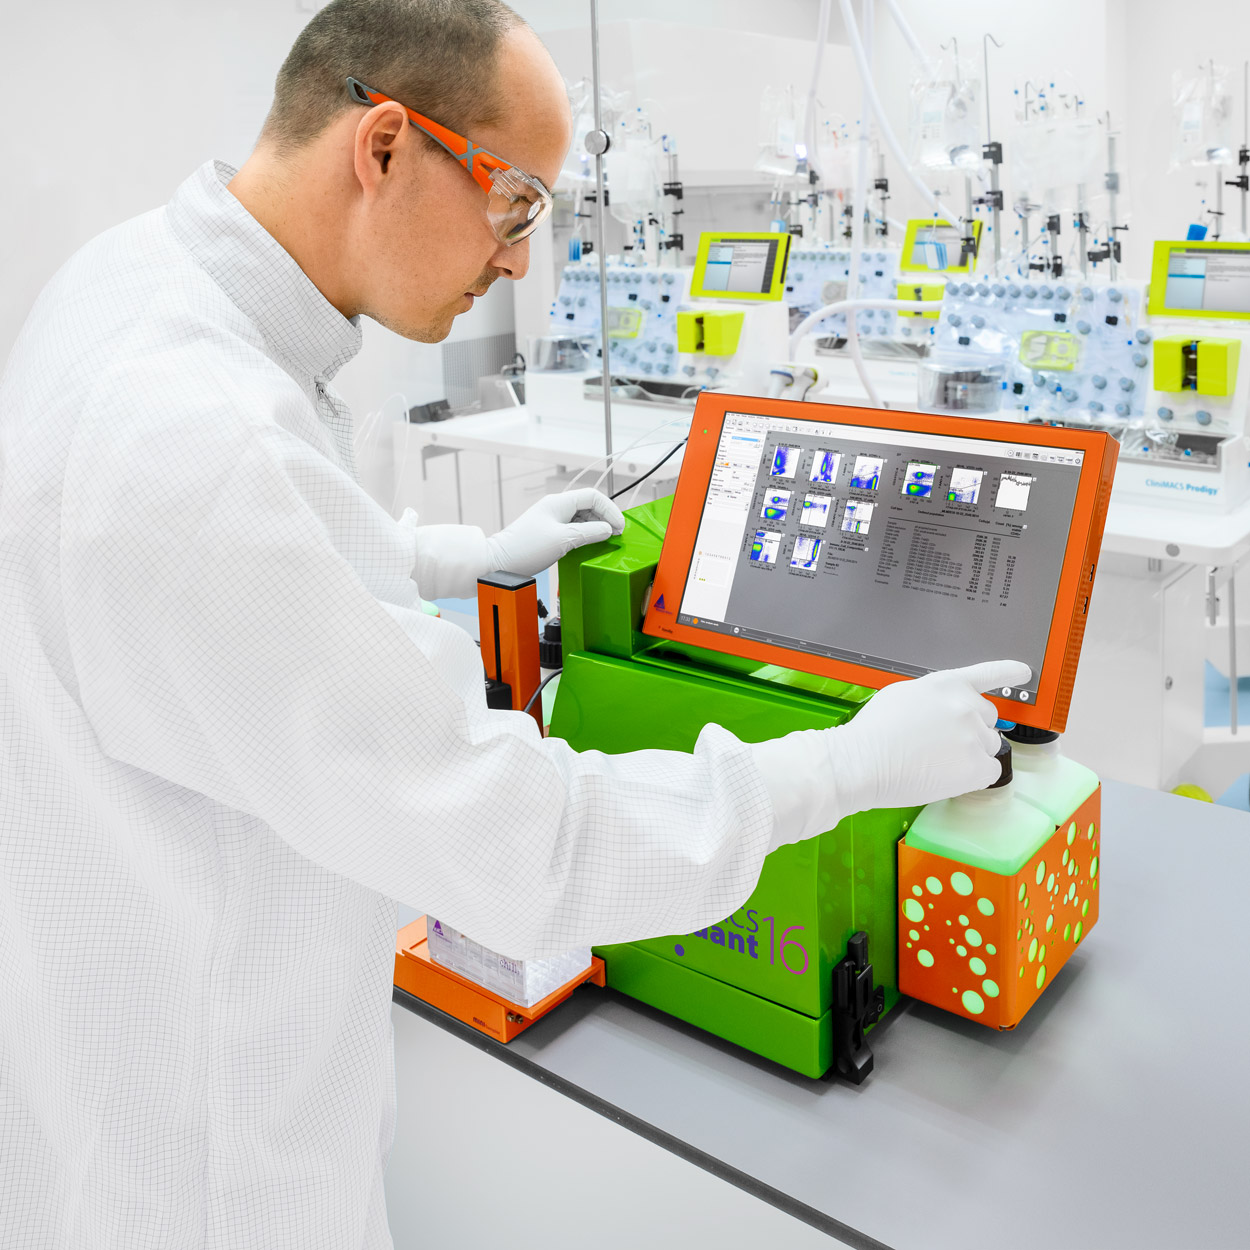 Male in lab attire working on a MACSQuant Analyzer 16.